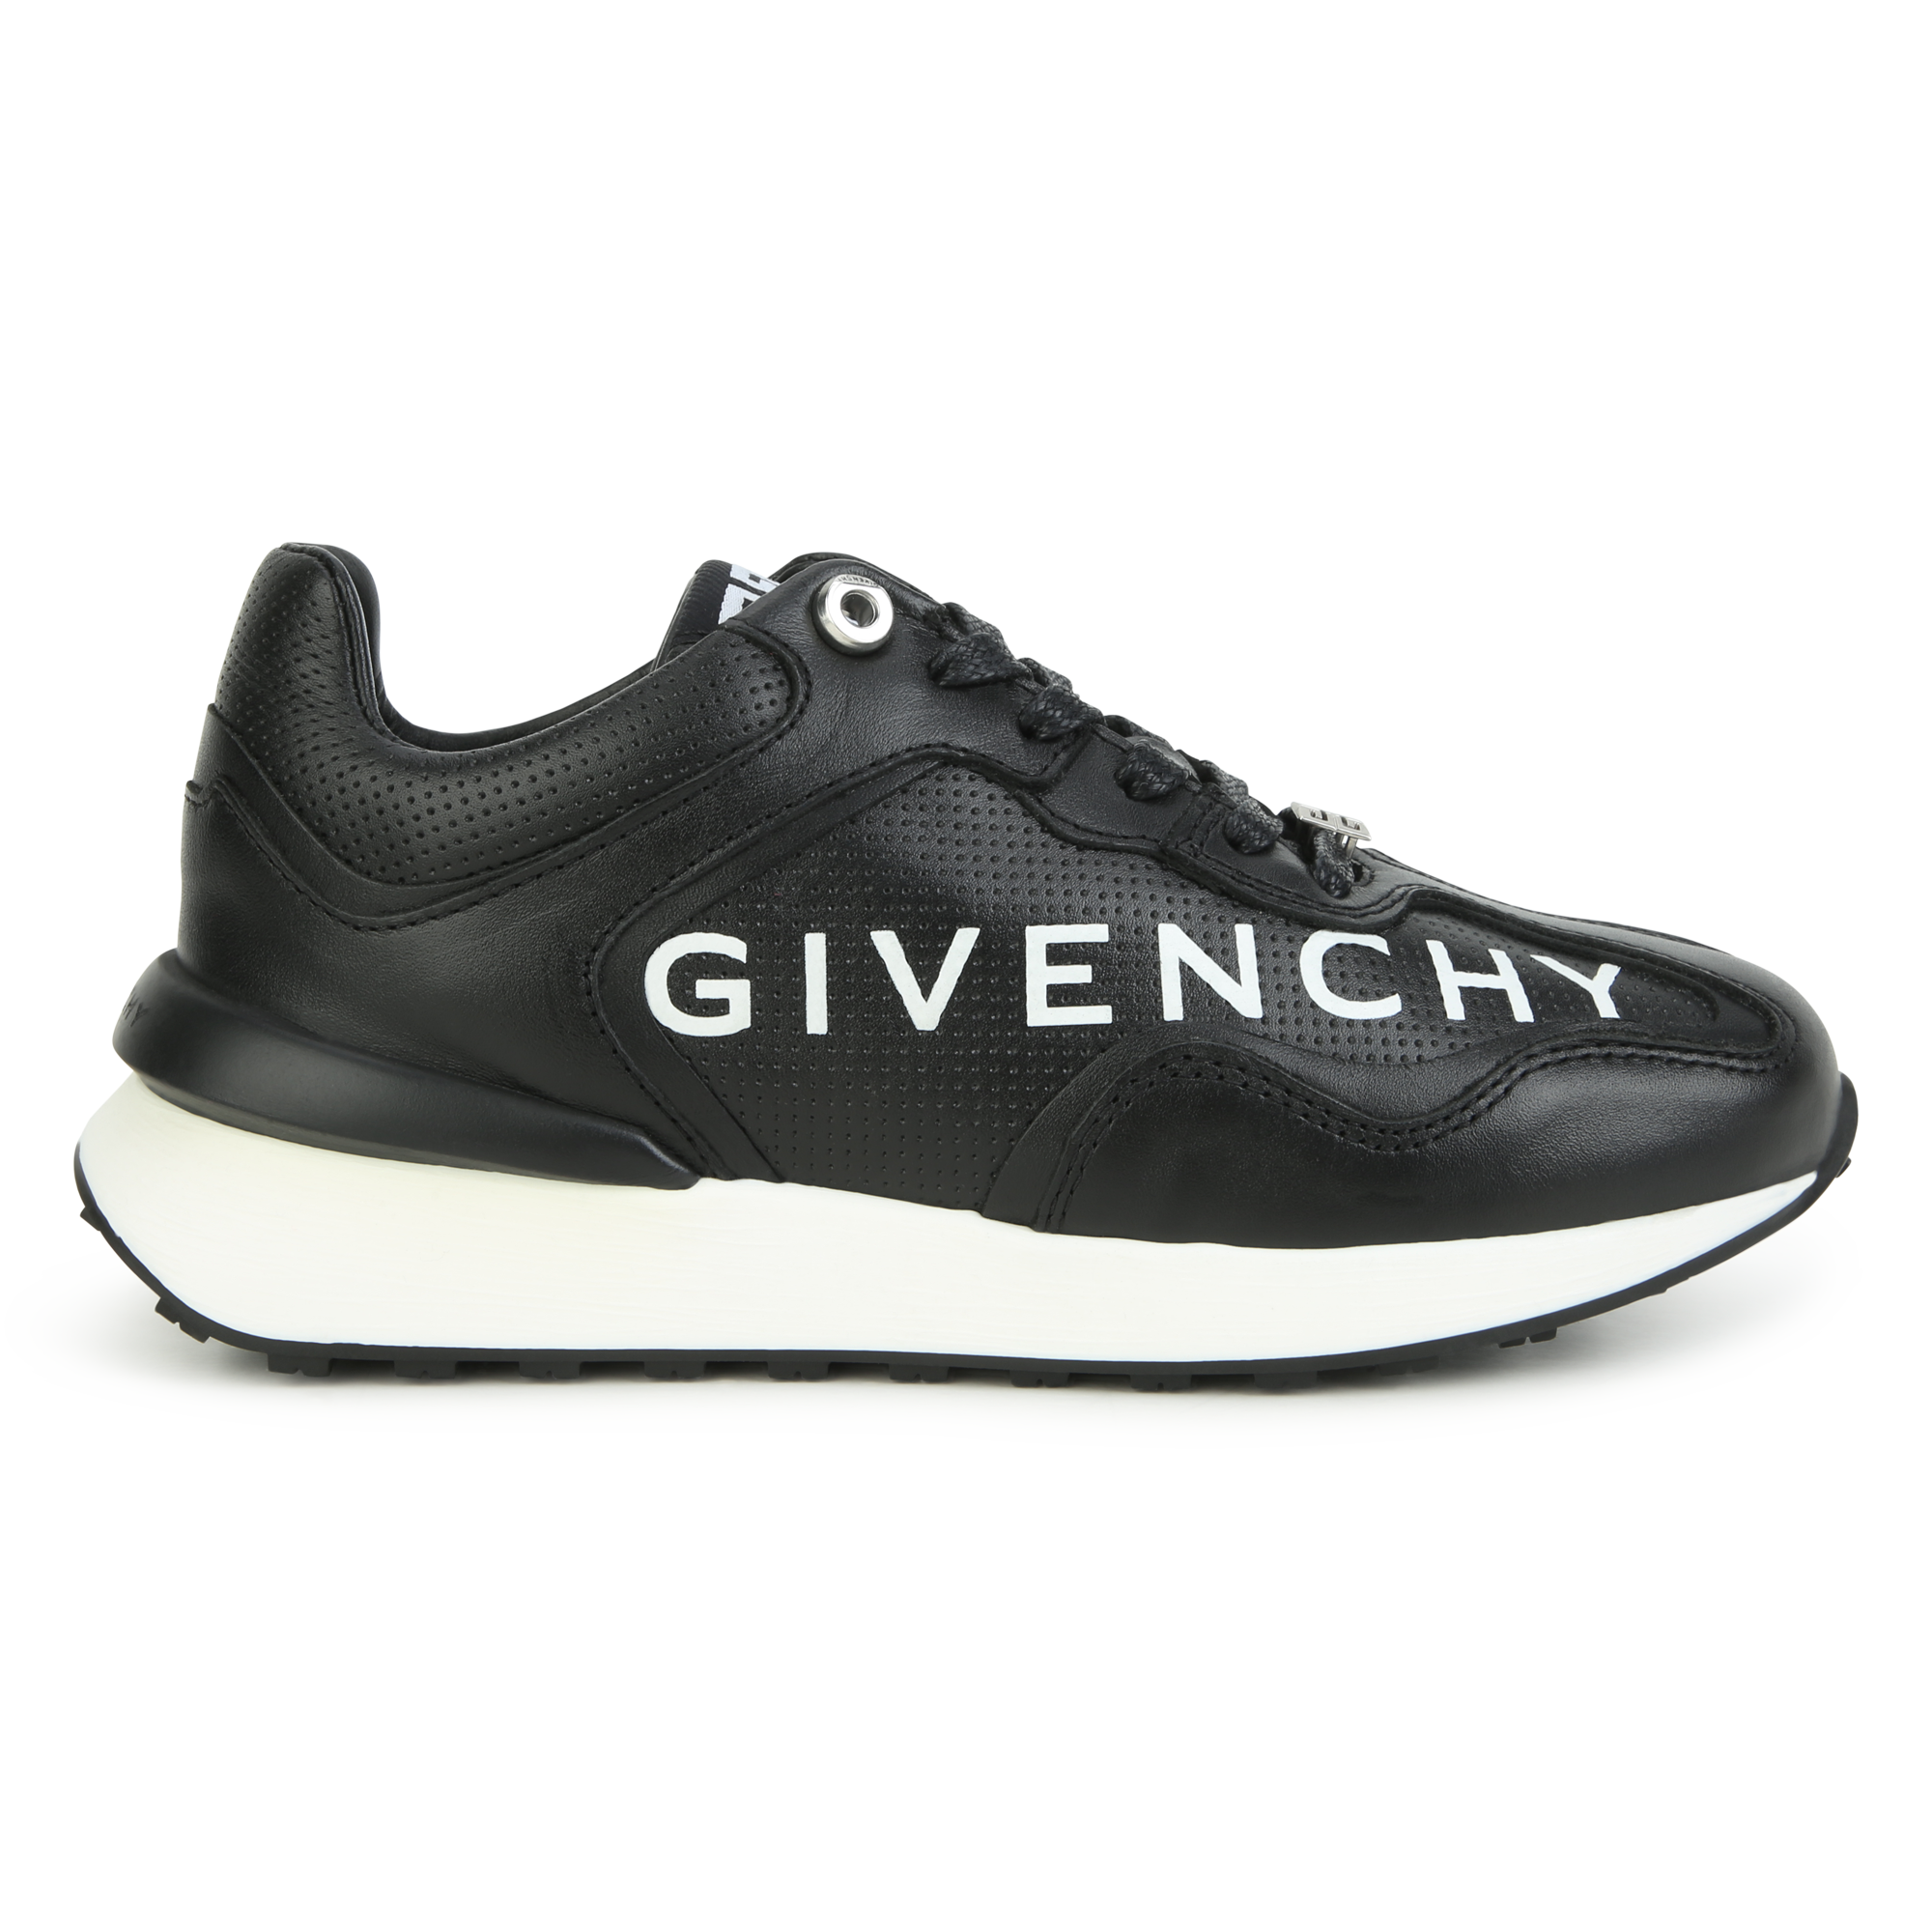 Givenchy | City black leather sneakers | Savannahs